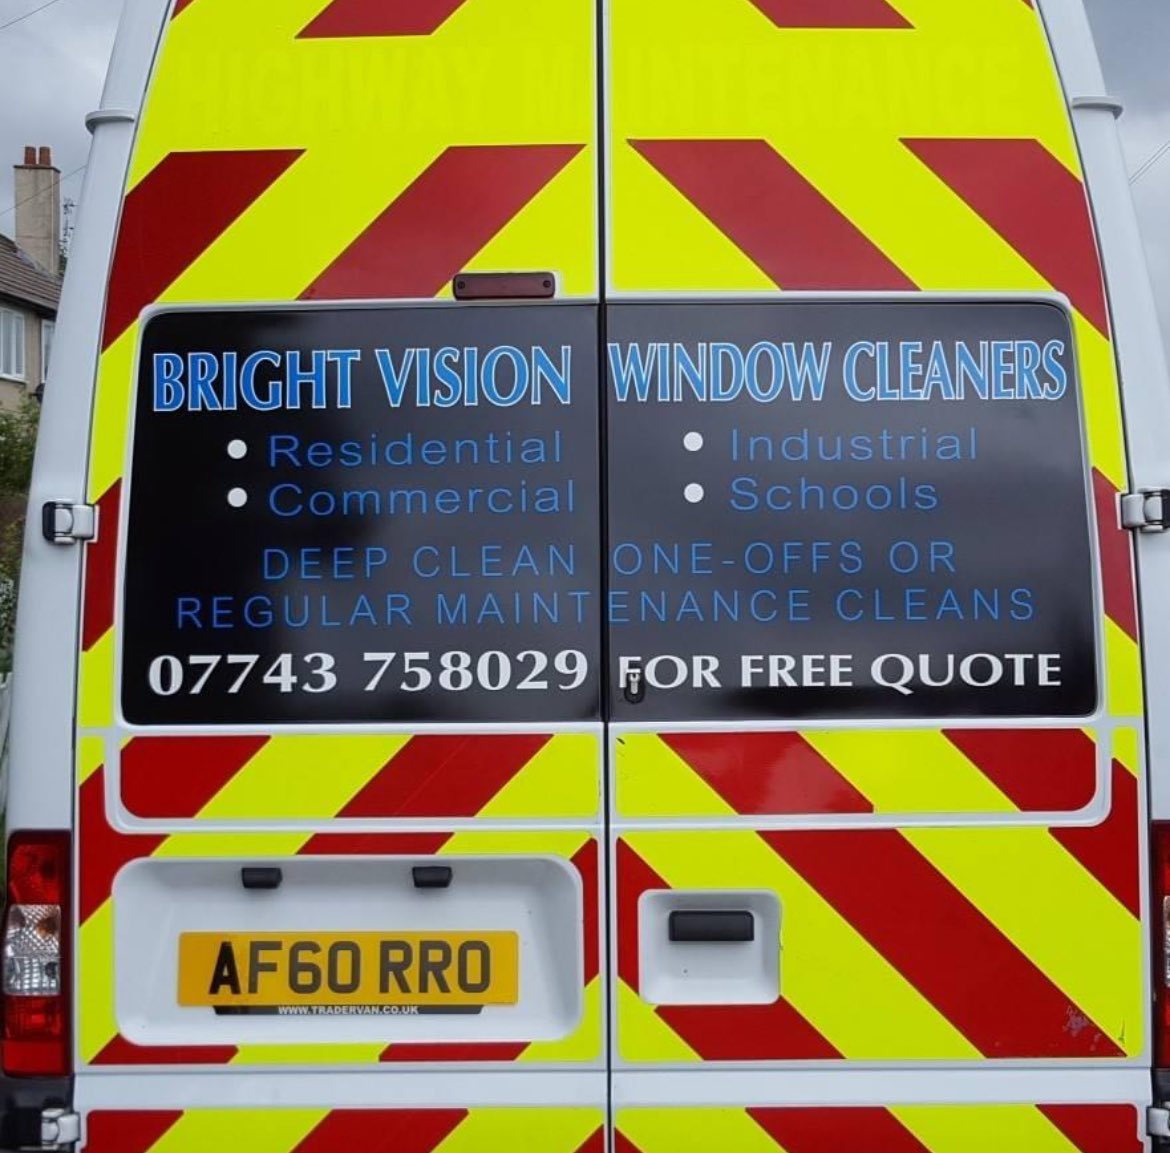 Coach 2 - Sponsored by “Bright Vision Window Cleaners” Give @RobRuss92409479 a message and get him cleaning your windows and gutters! 👍🏼 Who wants to sponsor Coach 3?